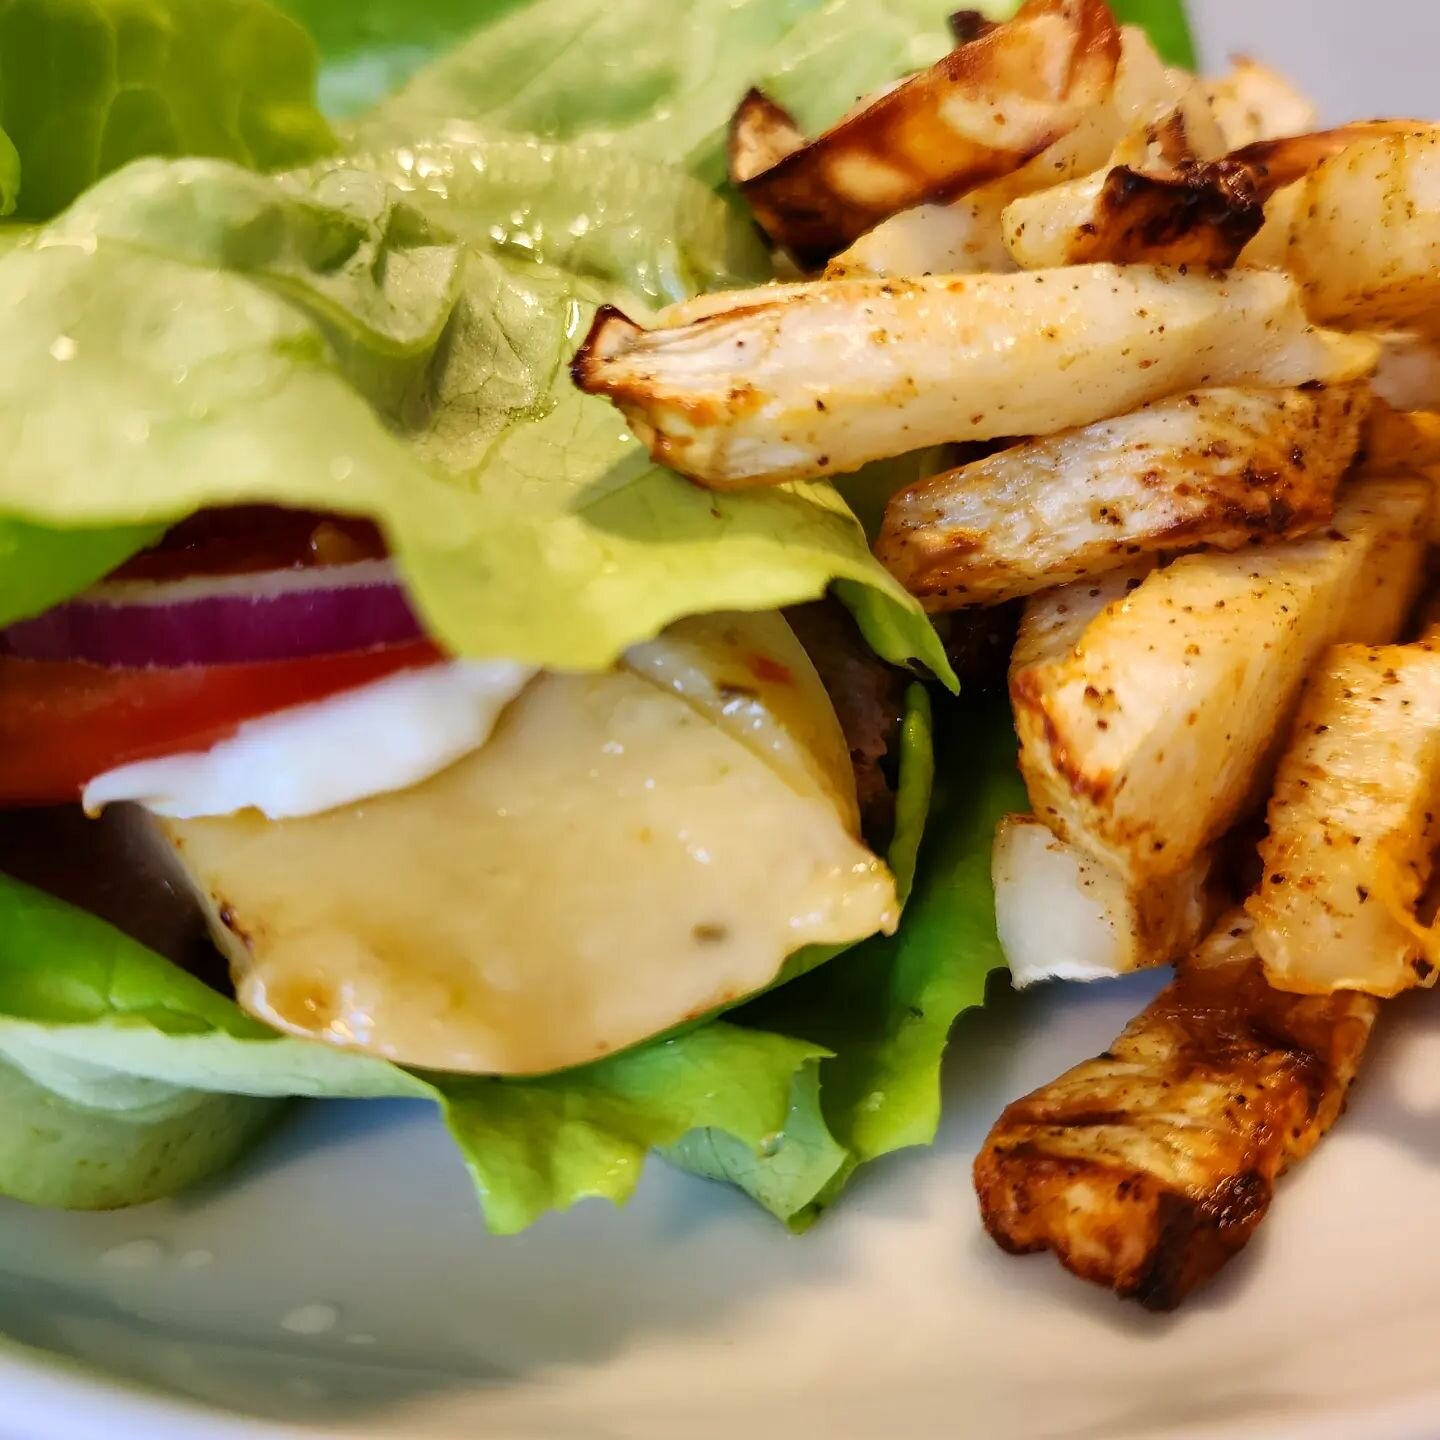 Lettuce wrapped cheeseburger with a side of celeriac fries. Perfect quick Saturday night supper at home 👌

#lovinitketo #keto #lowcarb #lchf #grainfree #sugarfree #burger #lettucewrapped #celeriac